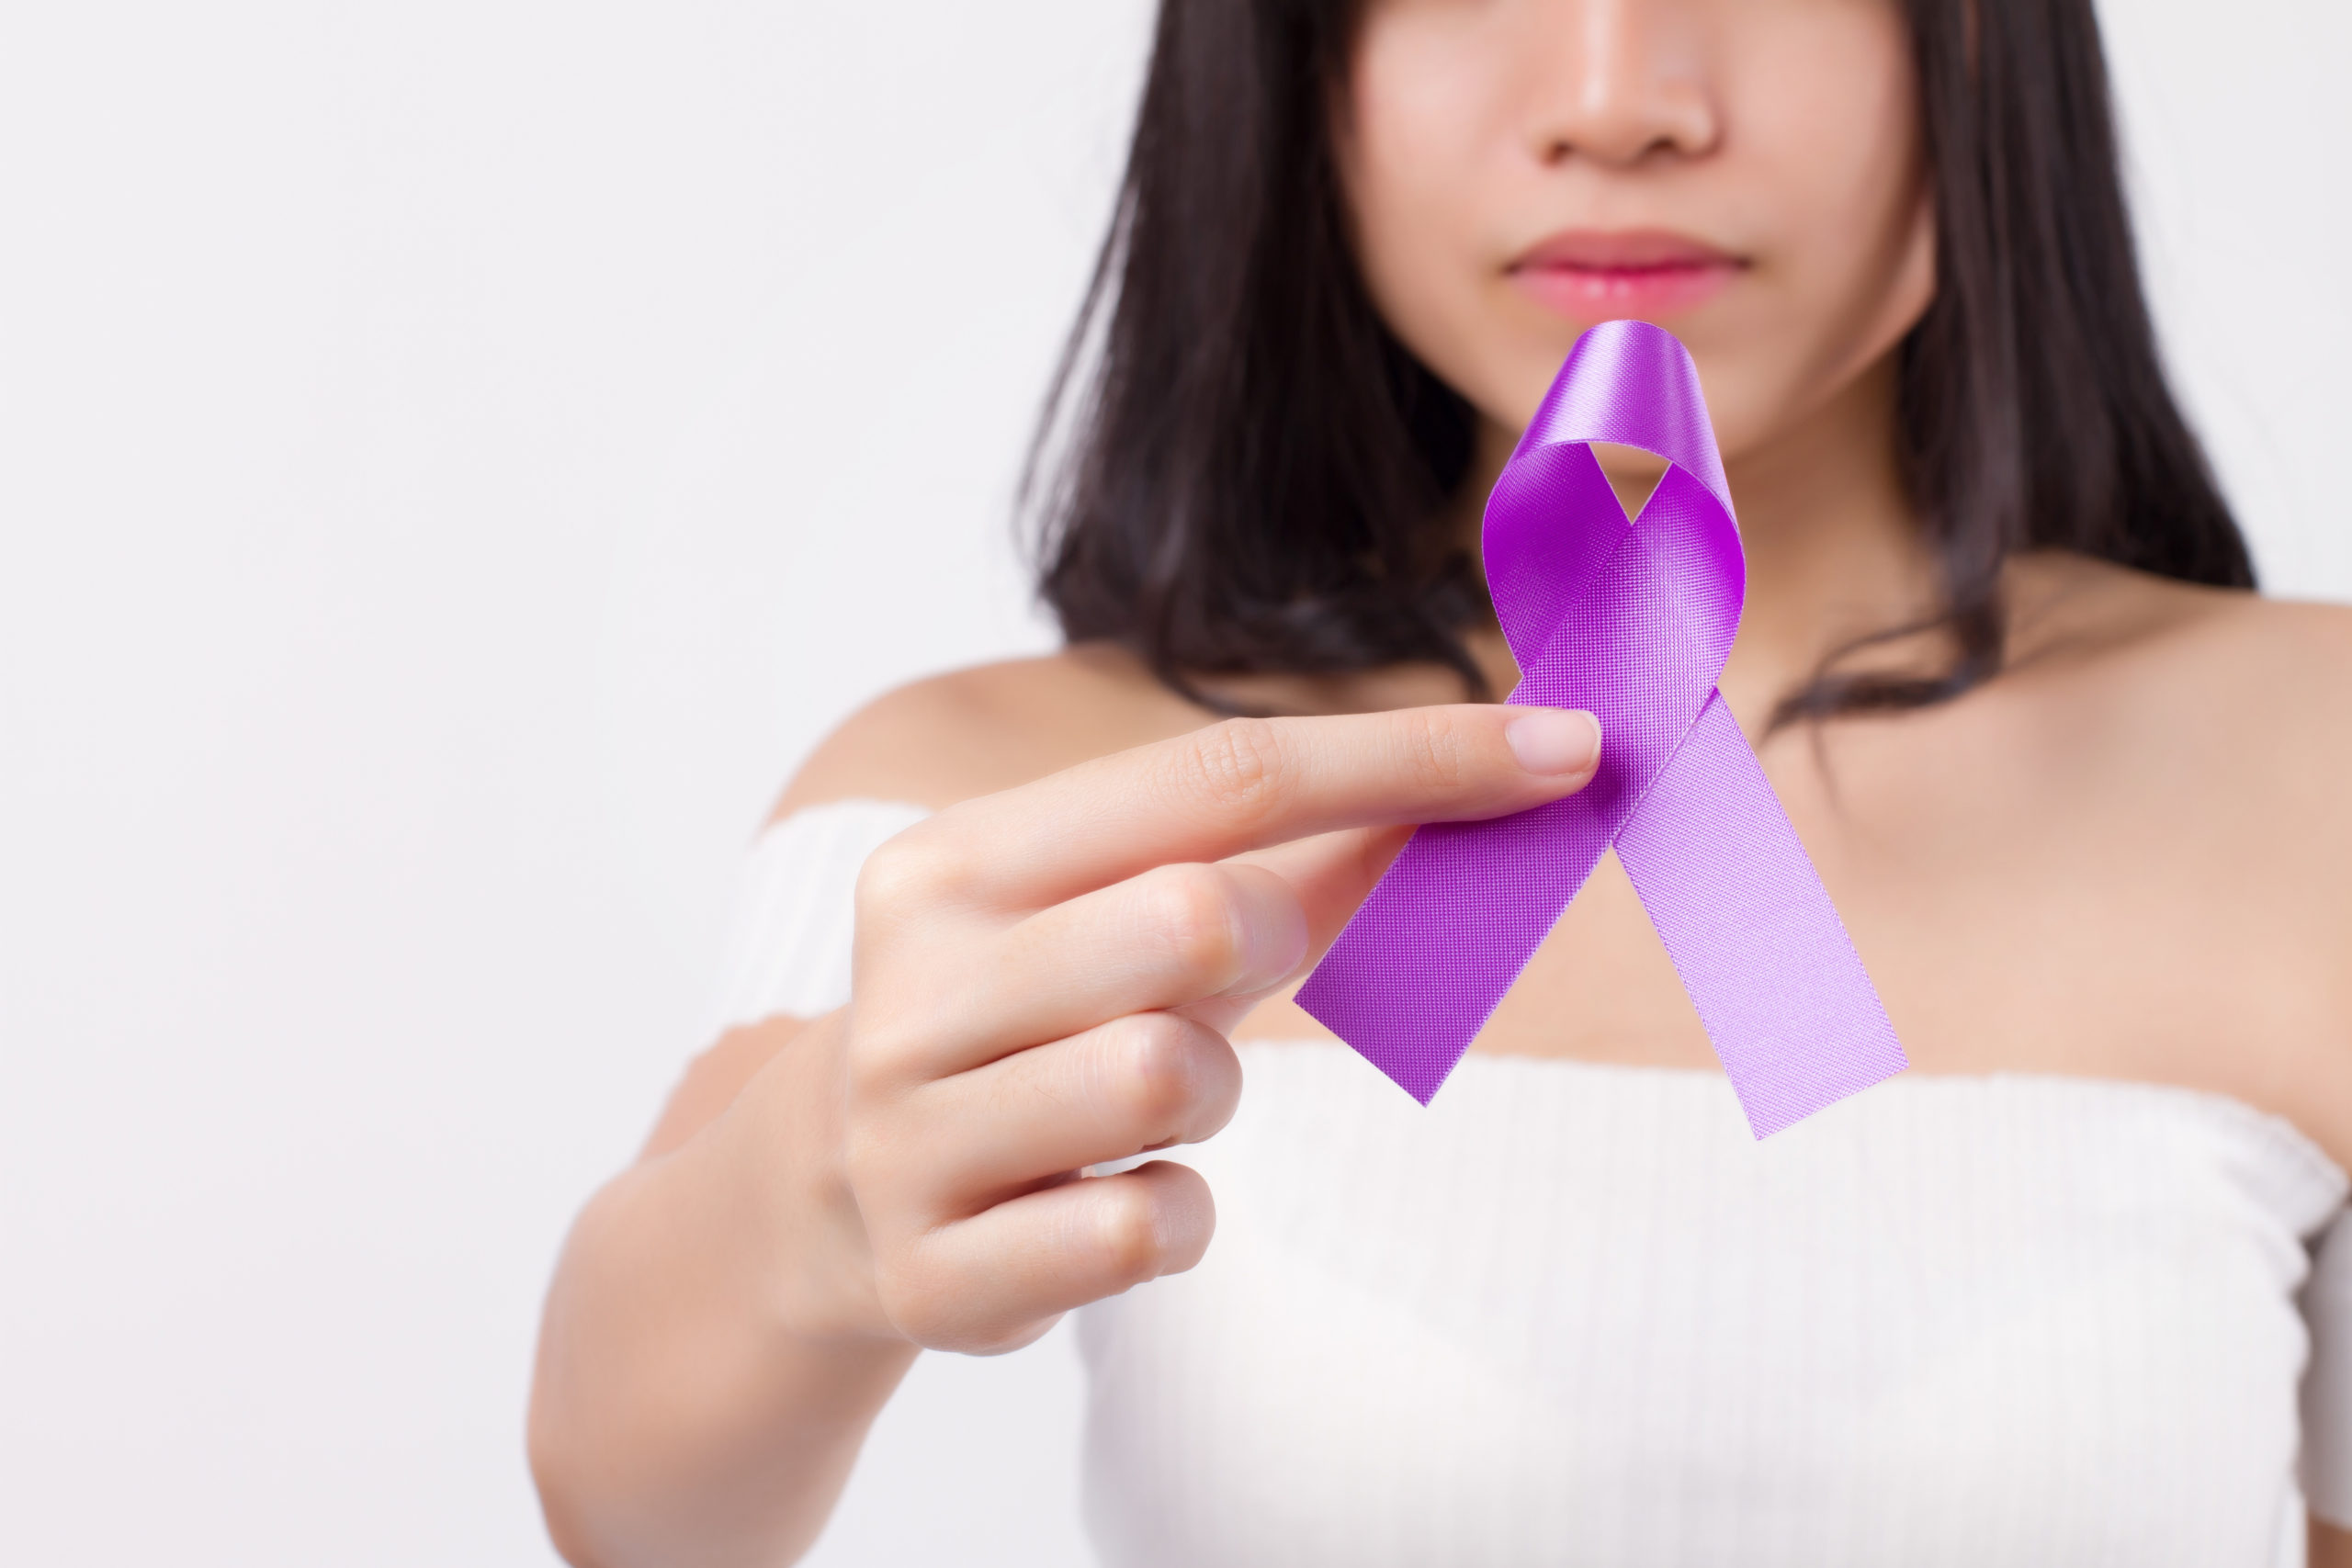 Learn More about Lupus and the Search for Answers